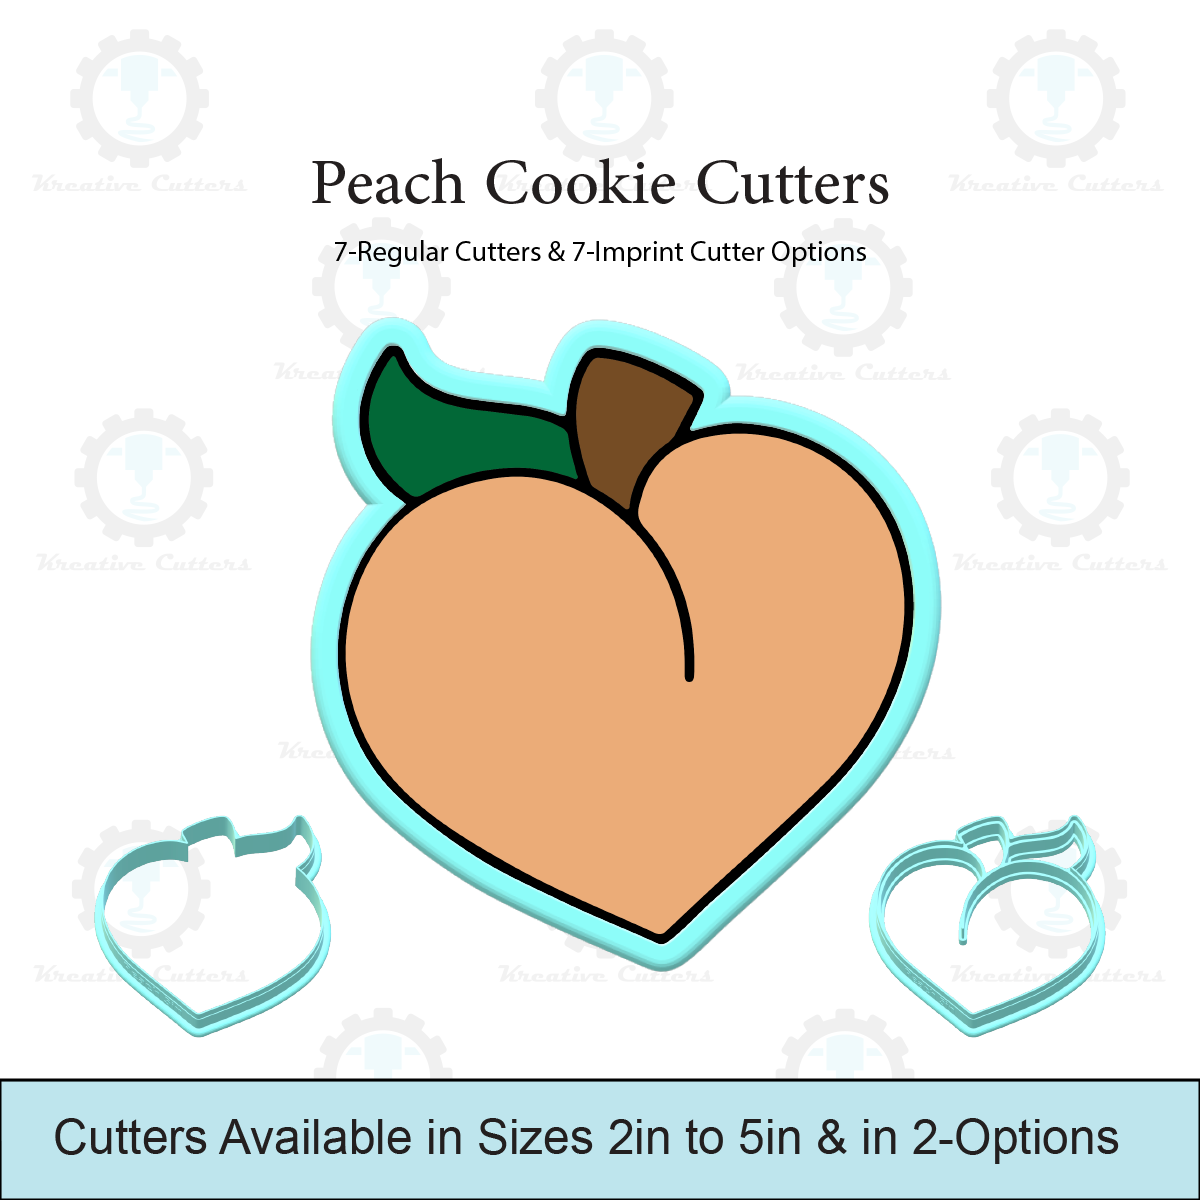 Peach Cookie Cutters | With Imprint Cutter Option